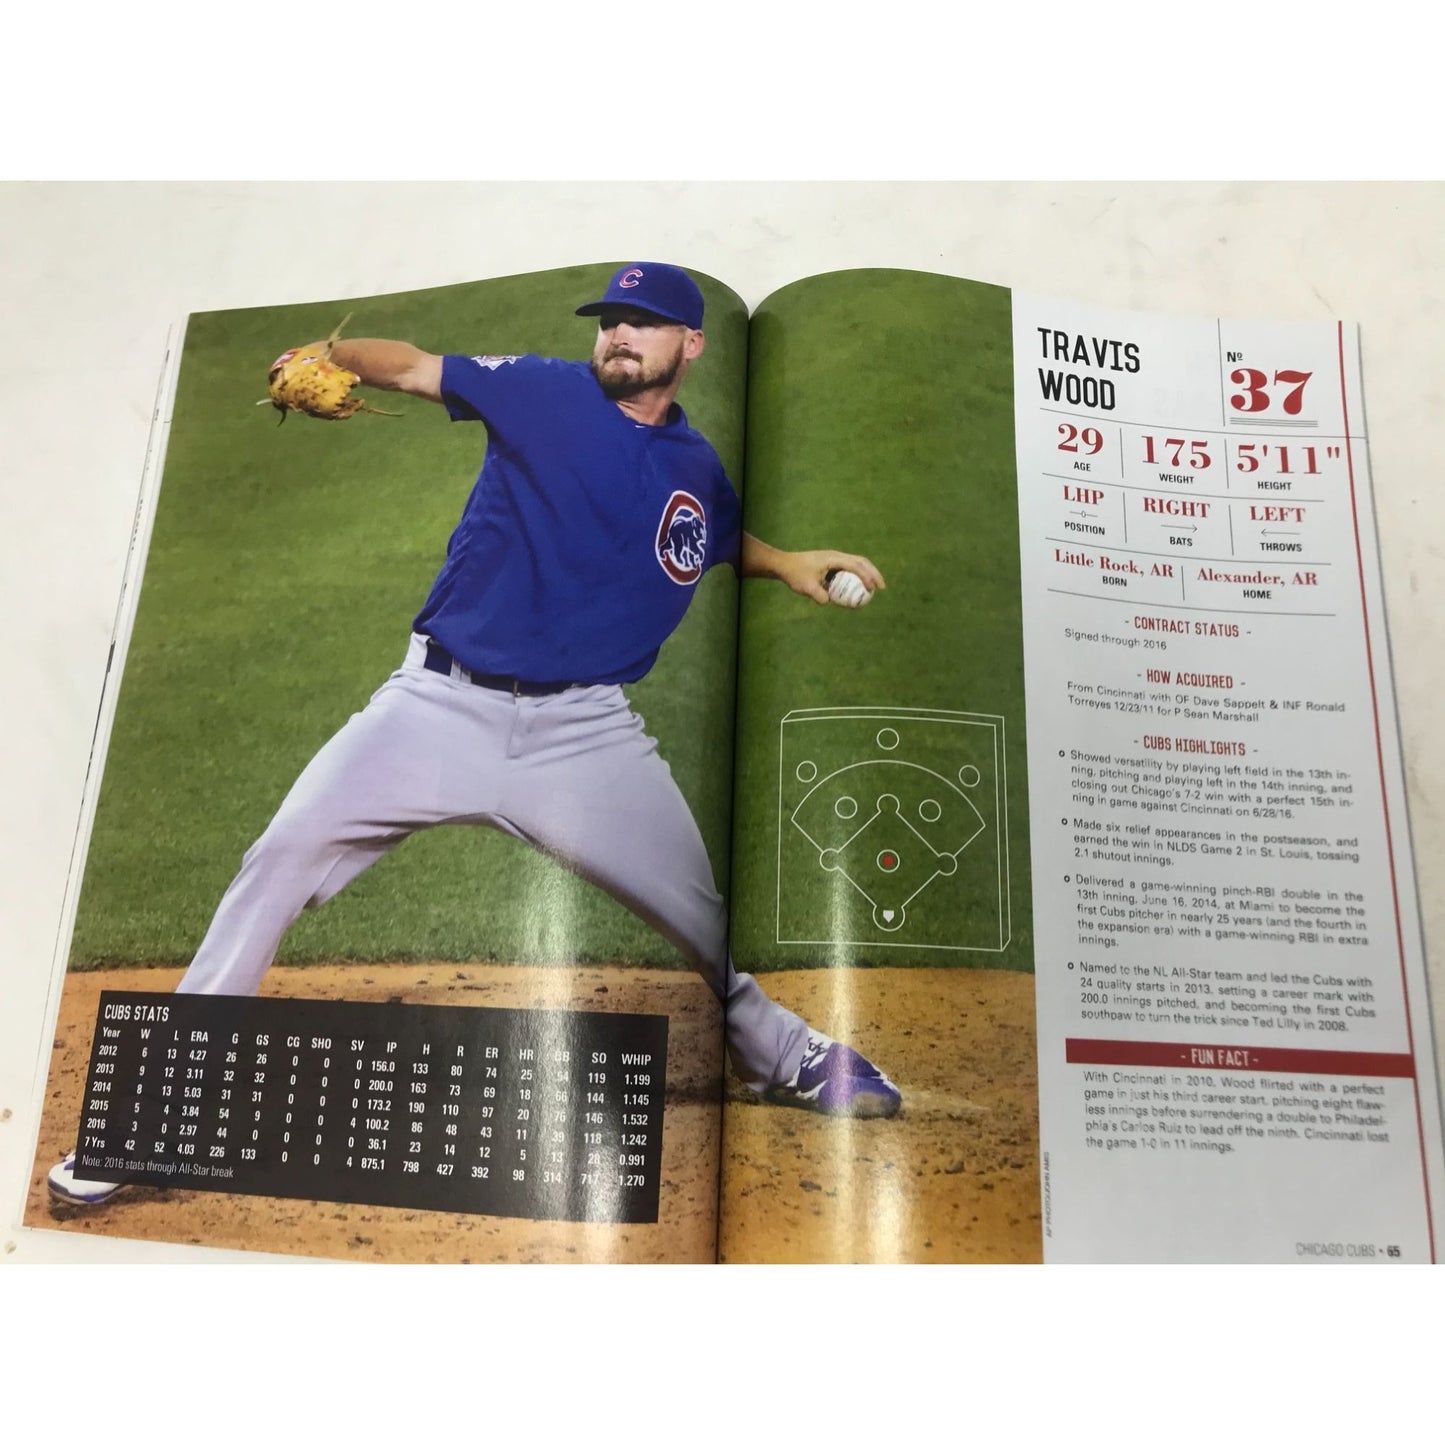 Chicago Cubs Lovable Losers No More 2016 World Series Newstand Rizzo